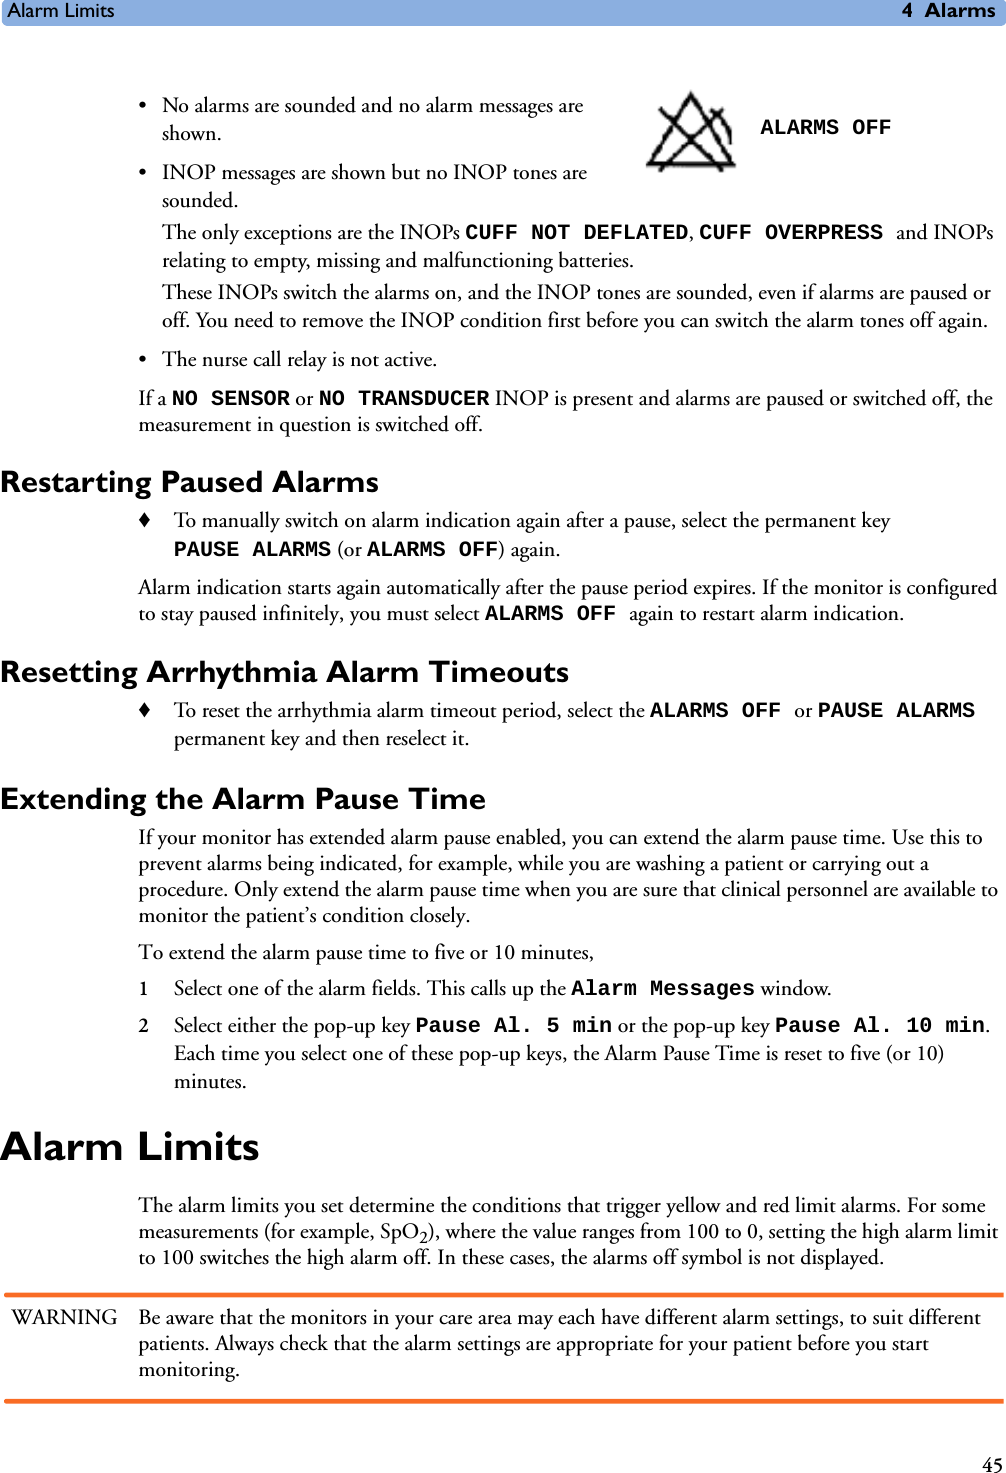 Alarm Limits 4Alarms45• No alarms are sounded and no alarm messages are shown. • INOP messages are shown but no INOP tones are sounded. The only exceptions are the INOPs CUFF NOT DEFLATED, CUFF OVERPRESS and INOPs relating to empty, missing and malfunctioning batteries. These INOPs switch the alarms on, and the INOP tones are sounded, even if alarms are paused or off. You need to remove the INOP condition first before you can switch the alarm tones off again.• The nurse call relay is not active.If a NO SENSOR or NO TRANSDUCER INOP is present and alarms are paused or switched off, the measurement in question is switched off. Restarting Paused Alarms ♦To manually switch on alarm indication again after a pause, select the permanent key PAUSE ALARMS (or ALARMS OFF) again. Alarm indication starts again automatically after the pause period expires. If the monitor is configured to stay paused infinitely, you must select ALARMS OFF again to restart alarm indication.Resetting Arrhythmia Alarm Timeouts♦To reset the arrhythmia alarm timeout period, select the ALARMS OFF or PAUSE ALARMS permanent key and then reselect it. Extending the Alarm Pause Time If your monitor has extended alarm pause enabled, you can extend the alarm pause time. Use this to prevent alarms being indicated, for example, while you are washing a patient or carrying out a procedure. Only extend the alarm pause time when you are sure that clinical personnel are available to monitor the patient’s condition closely. To extend the alarm pause time to five or 10 minutes, 1Select one of the alarm fields. This calls up the Alarm Messages window.2Select either the pop-up key Pause Al. 5 min or the pop-up key Pause Al. 10 min. Each time you select one of these pop-up keys, the Alarm Pause Time is reset to five (or 10) minutes.Alarm LimitsThe alarm limits you set determine the conditions that trigger yellow and red limit alarms. For some measurements (for example, SpO2), where the value ranges from 100 to 0, setting the high alarm limit to 100 switches the high alarm off. In these cases, the alarms off symbol is not displayed.WARNING Be aware that the monitors in your care area may each have different alarm settings, to suit different patients. Always check that the alarm settings are appropriate for your patient before you start monitoring.ALARMS OFF